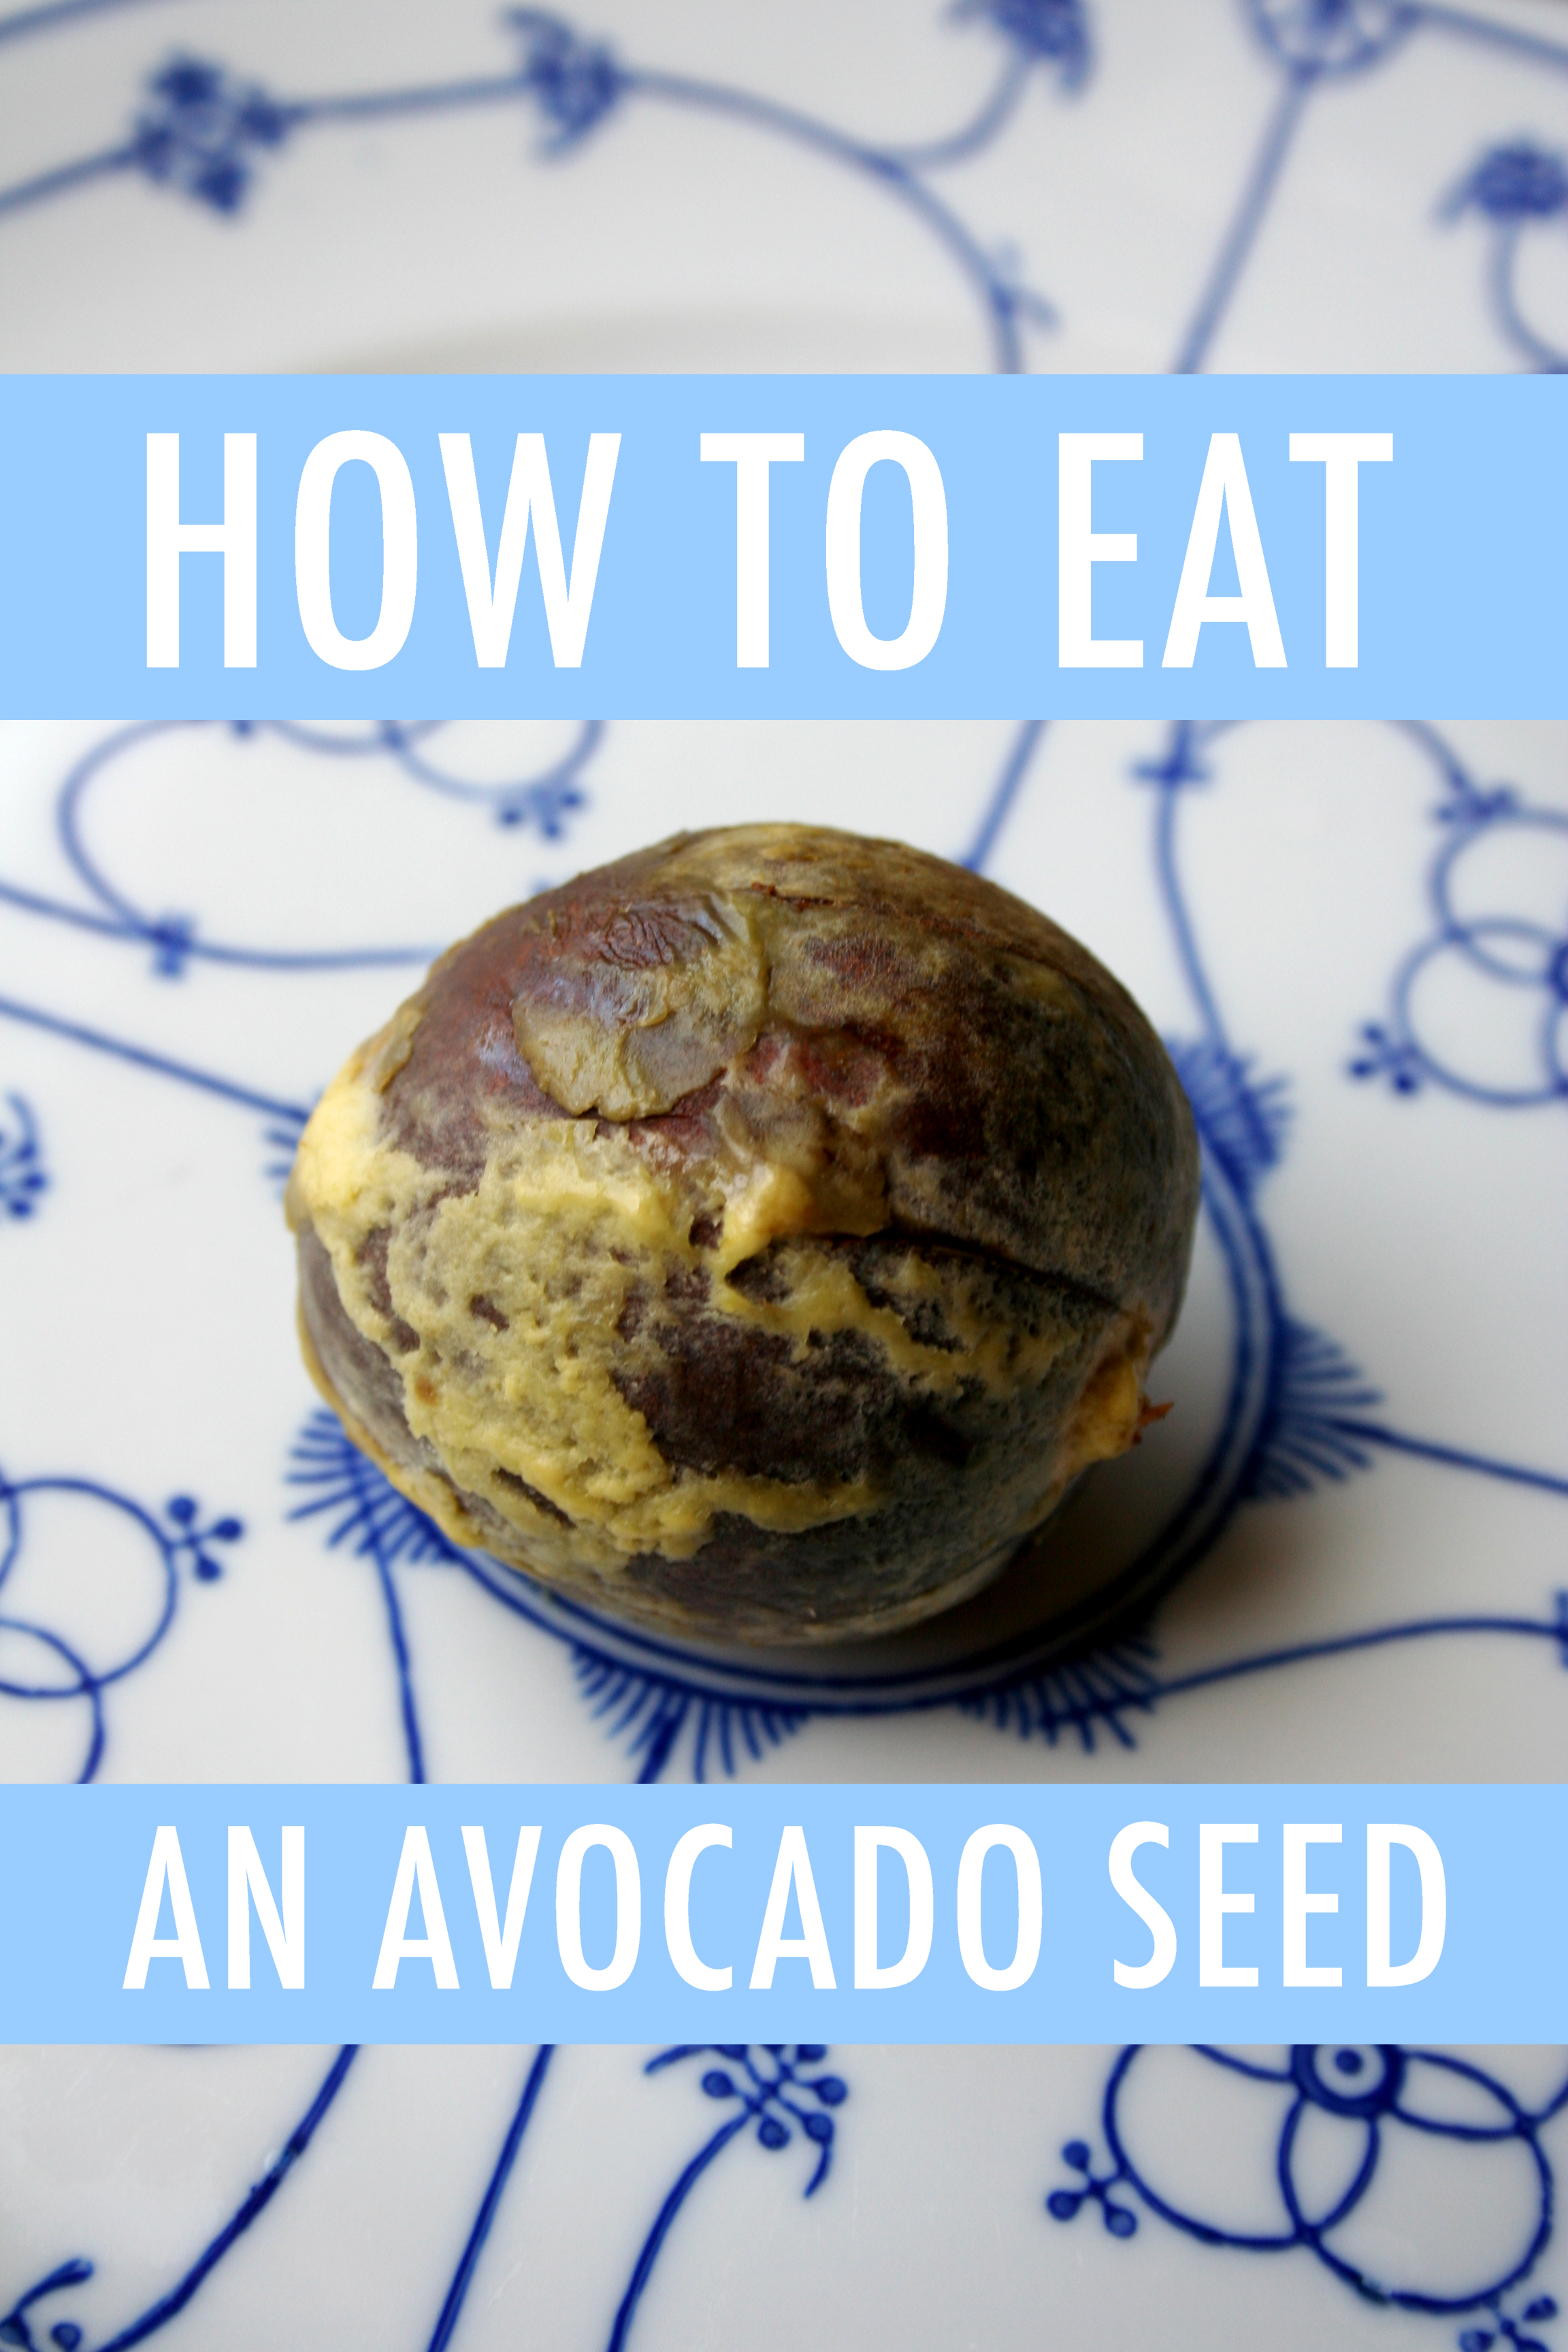 How to eat an avocado seed